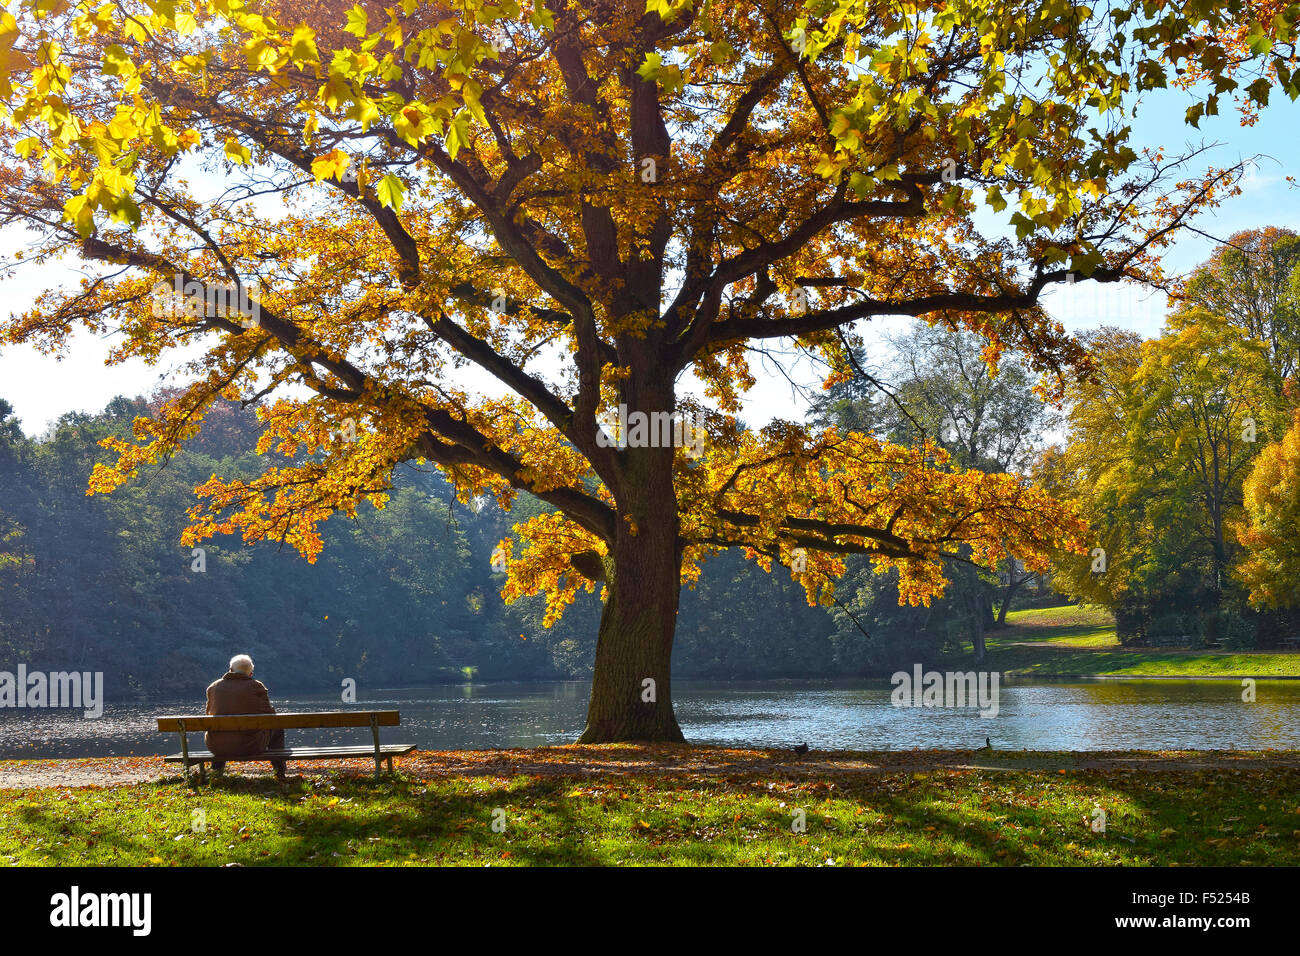 Indian summer, colorful trees in autumn, lake with single man sitting on a bench Stock Photo